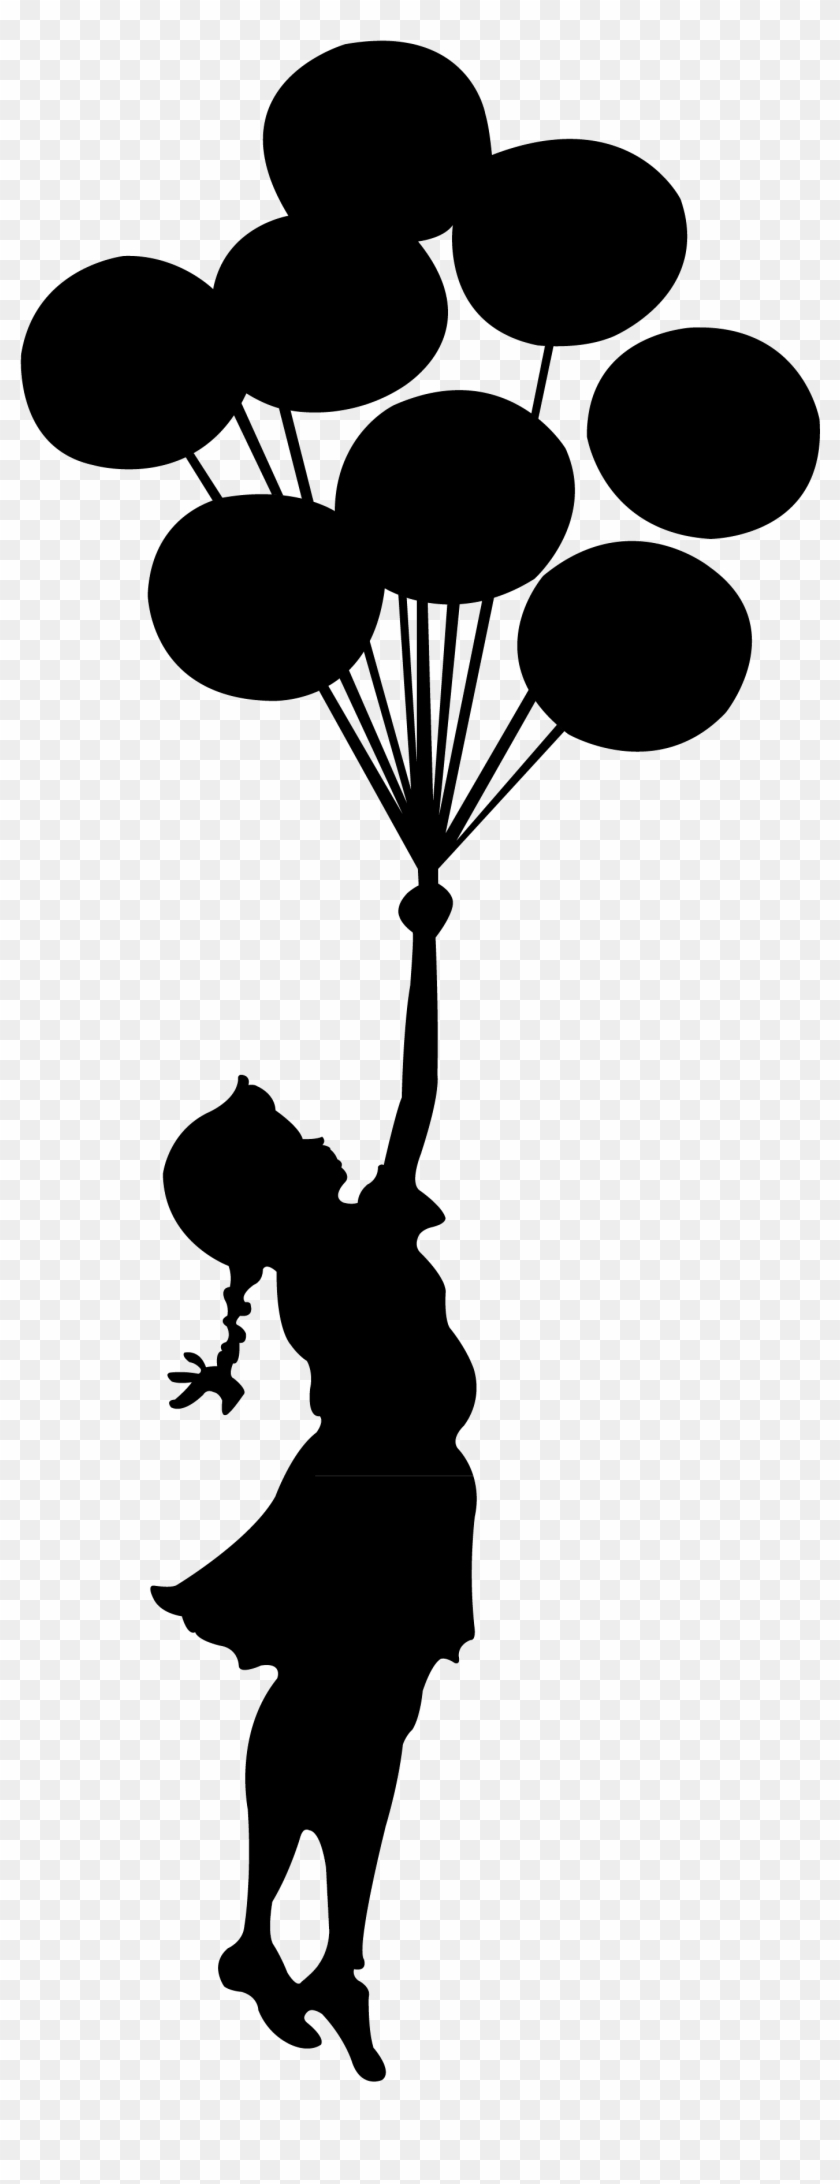 Girl Dancing With Umbrella Silhouette - Banksy Floating Balloon Girl Wall Stickers #447448